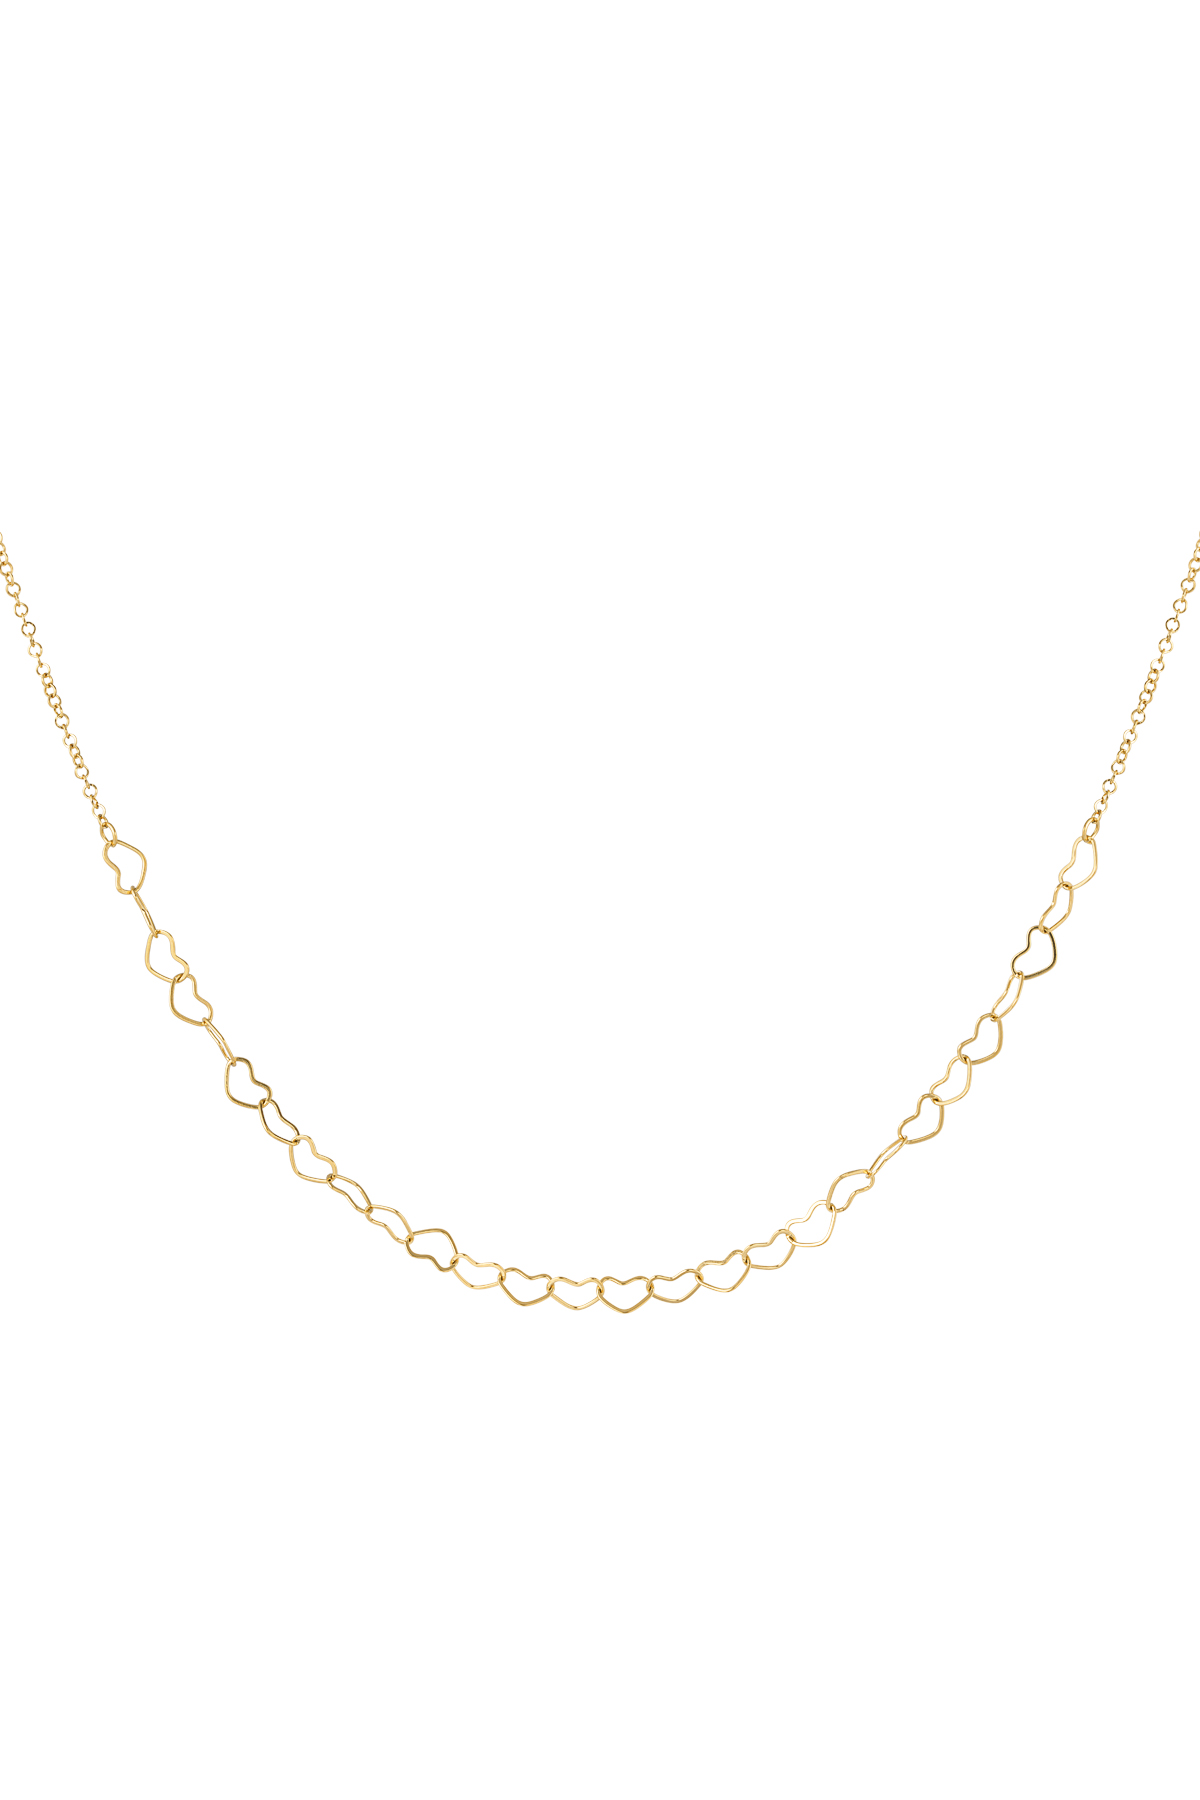 Necklace linked hearts - gold 